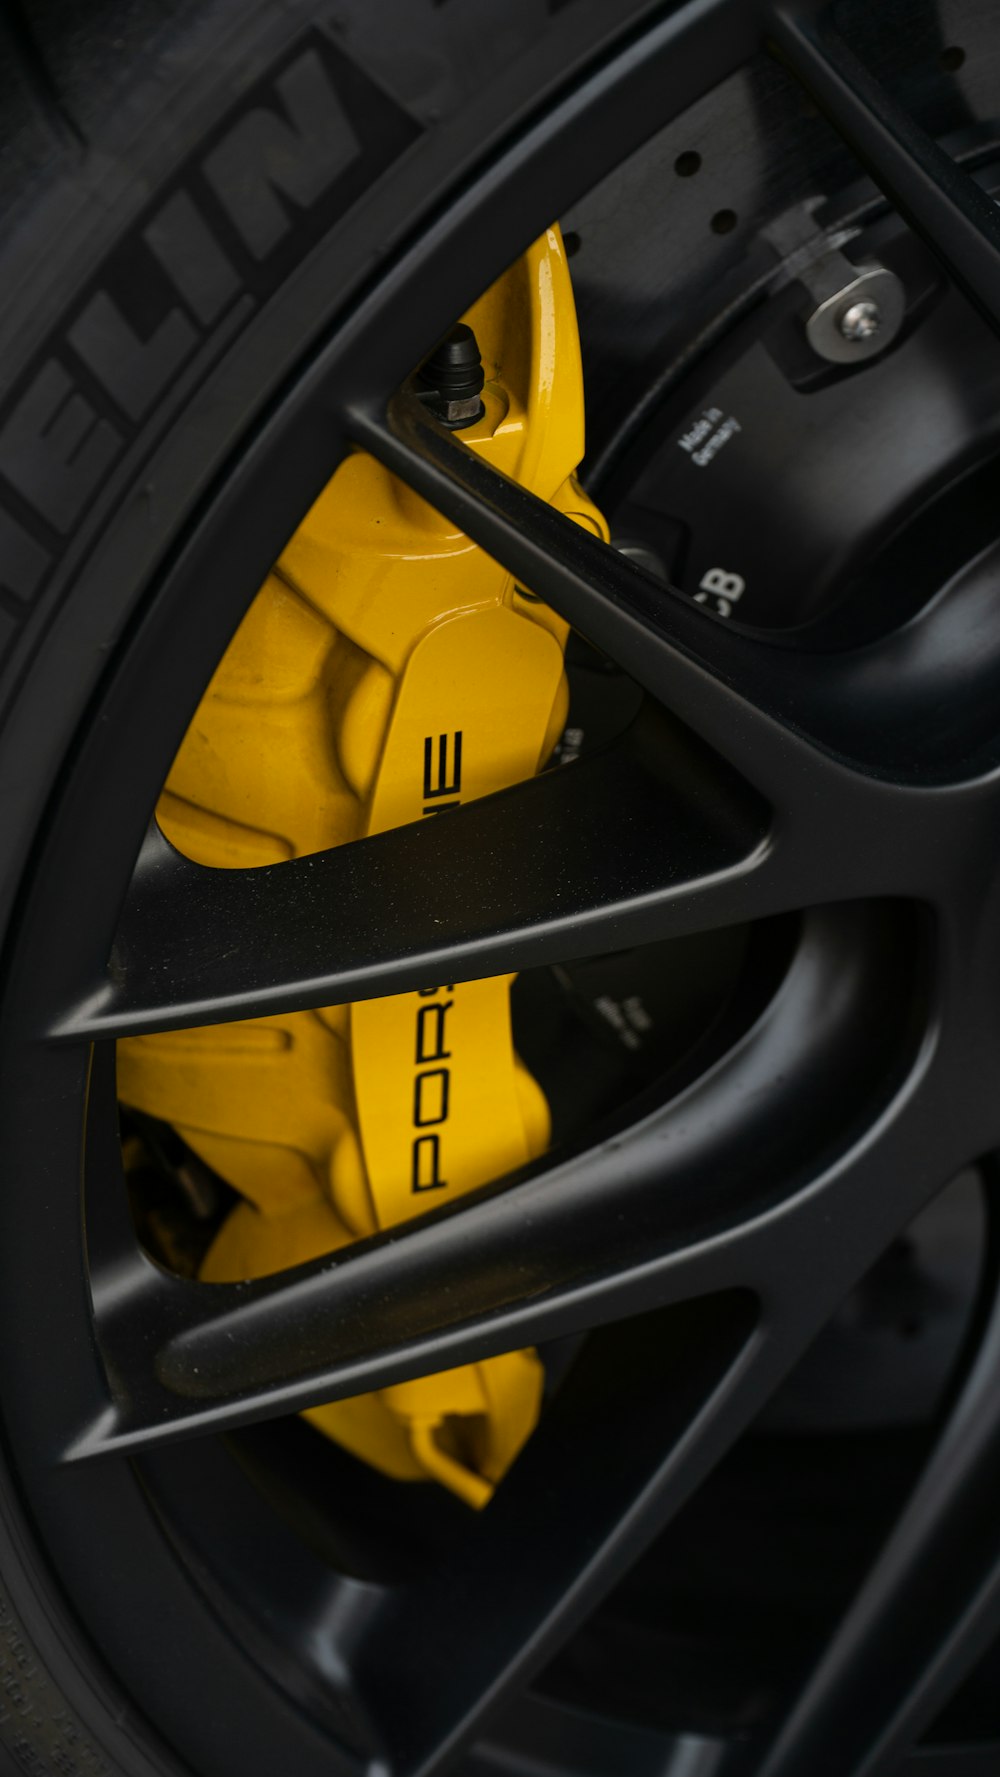 a close up of a tire on a sports car